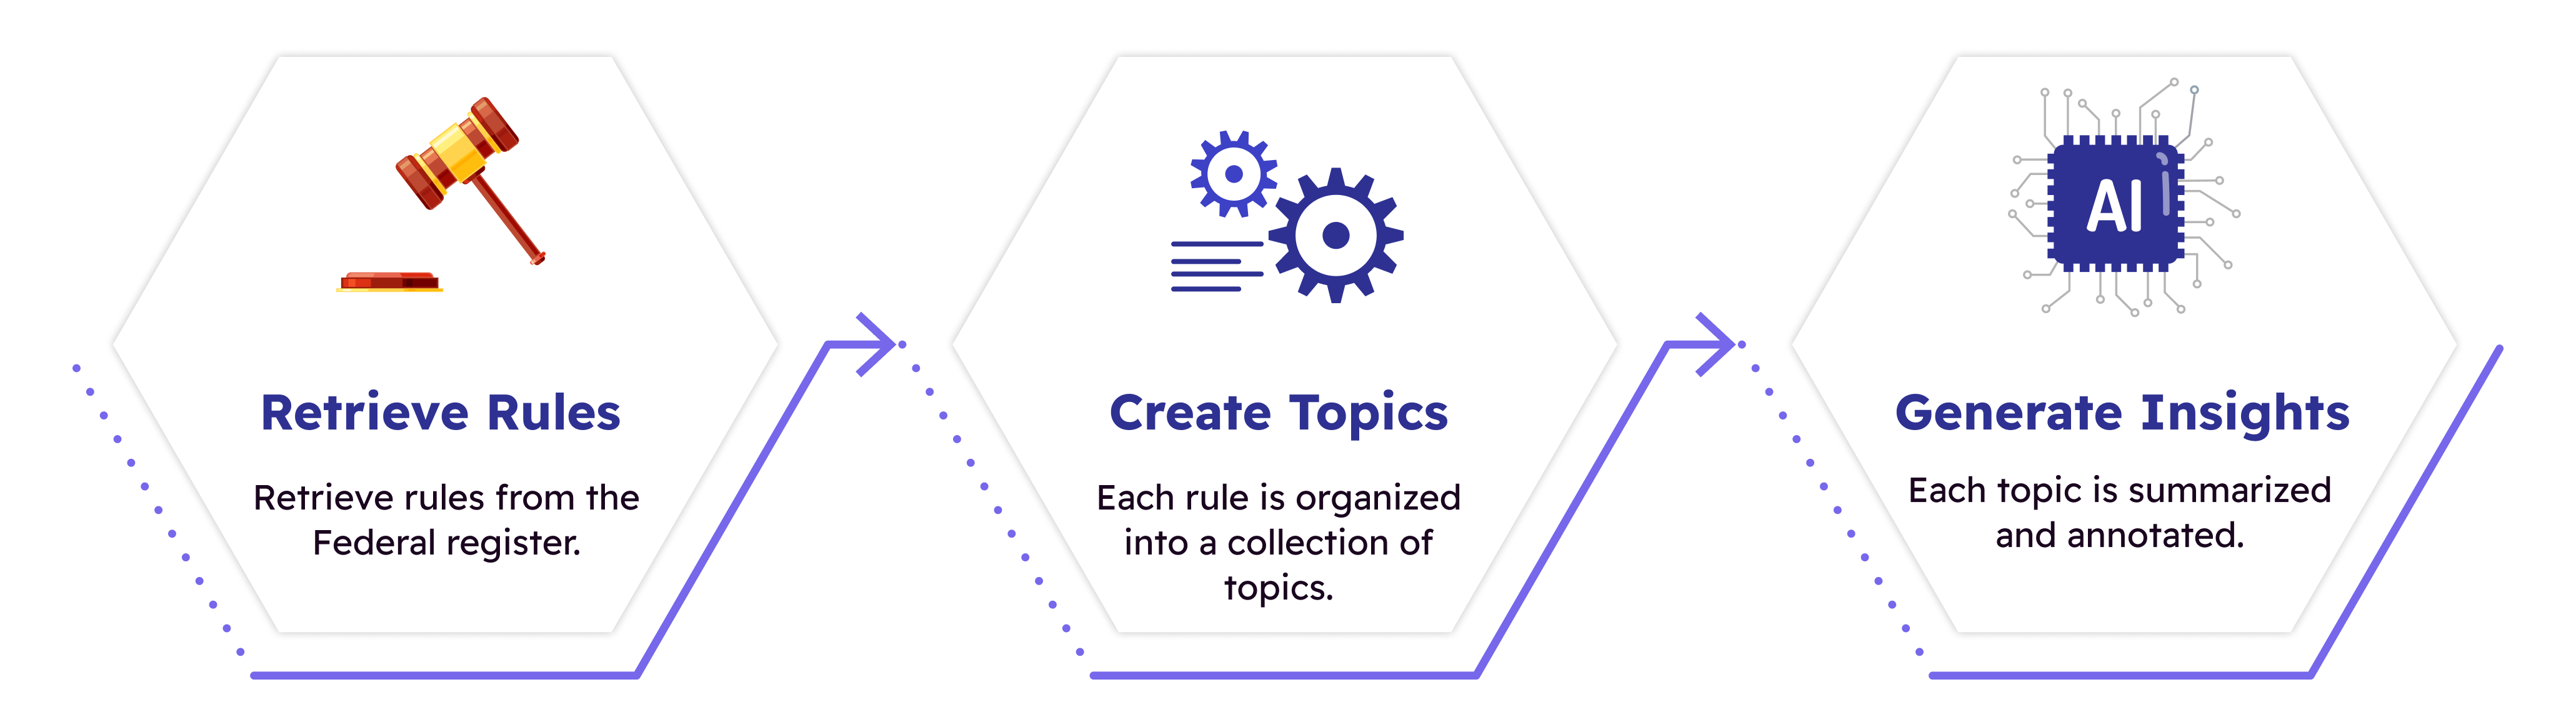 A 3 step process. Step 1: Hexagon with gavel representing the Federal Register. Step 2:
Hexagon with gears partitioning a rule into topics. Step 3: Hexagon with AI chip summarizing
and annotating a topic